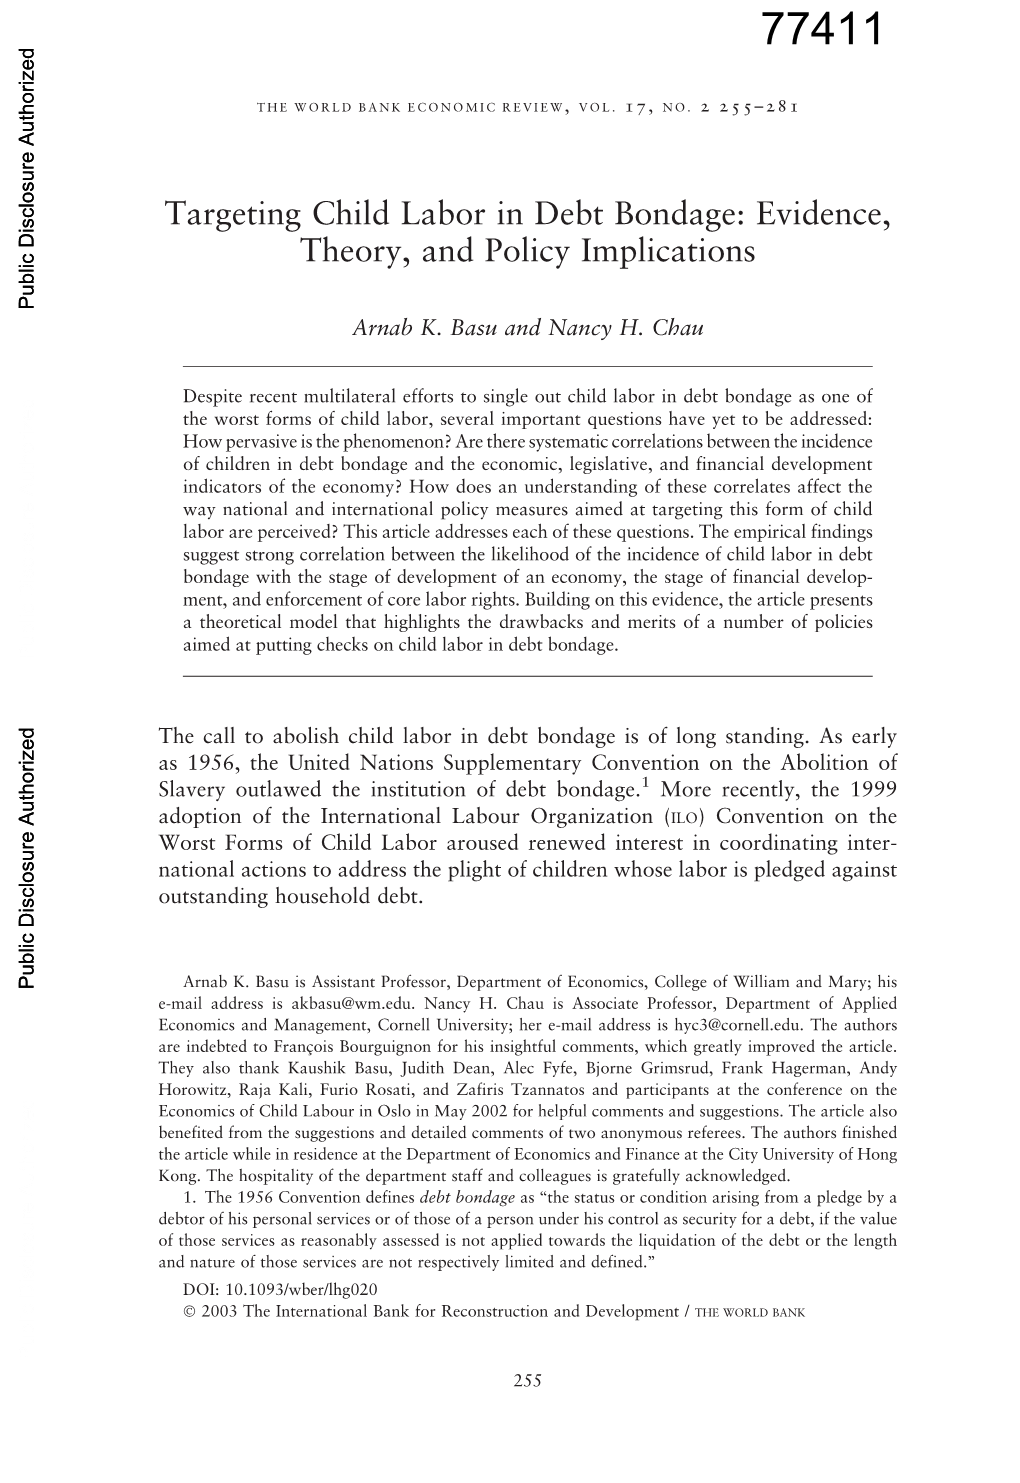 Targeting Child Labor in Debt Bondage: Evidence, Theory, and Policy Implications Public Disclosure Authorized Arnab K